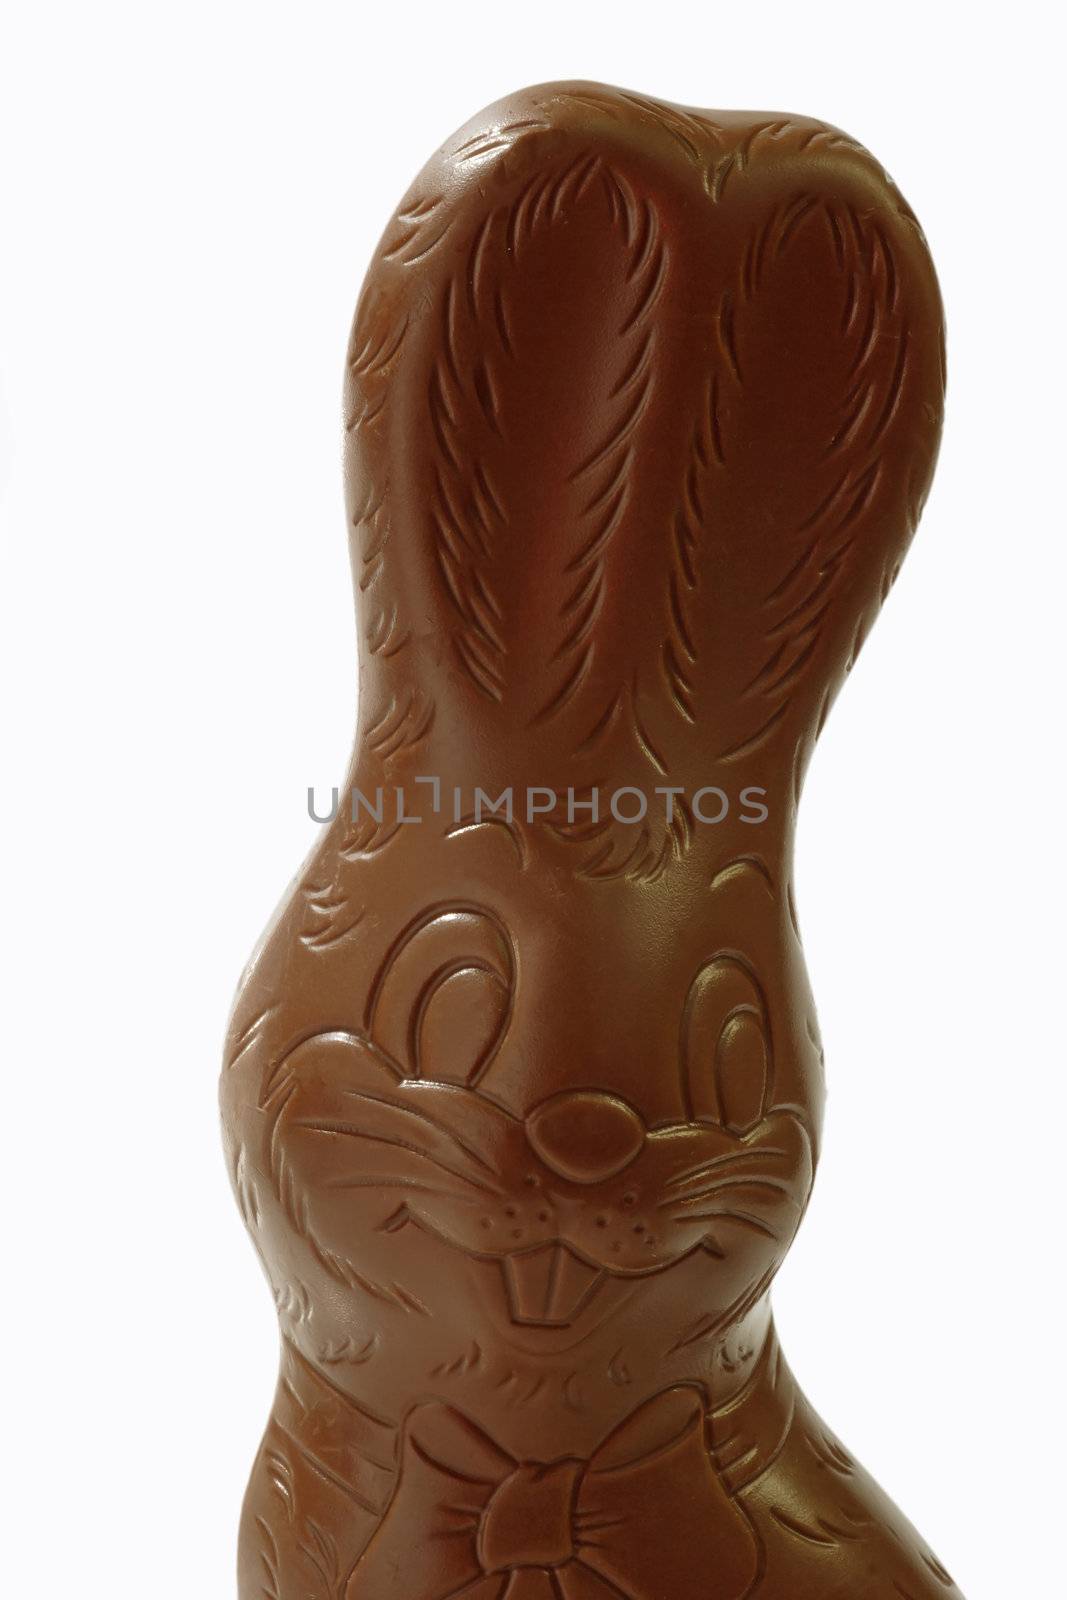 Chocolate easter bunny by Teamarbeit